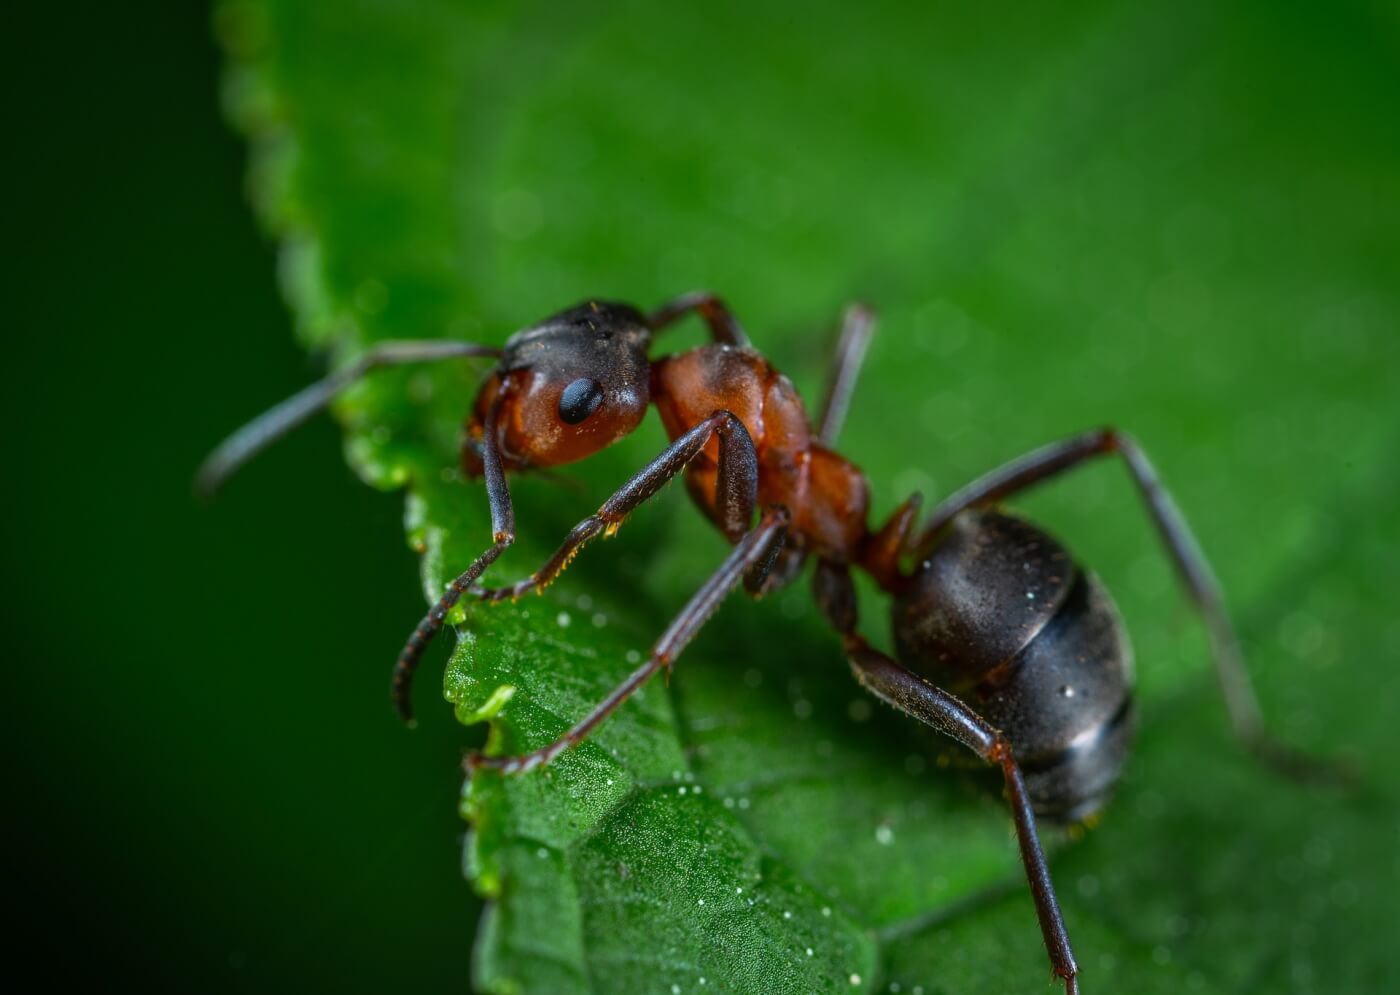 Raise Your Antennae and Tune Into Some Fascinating Facts About Ants